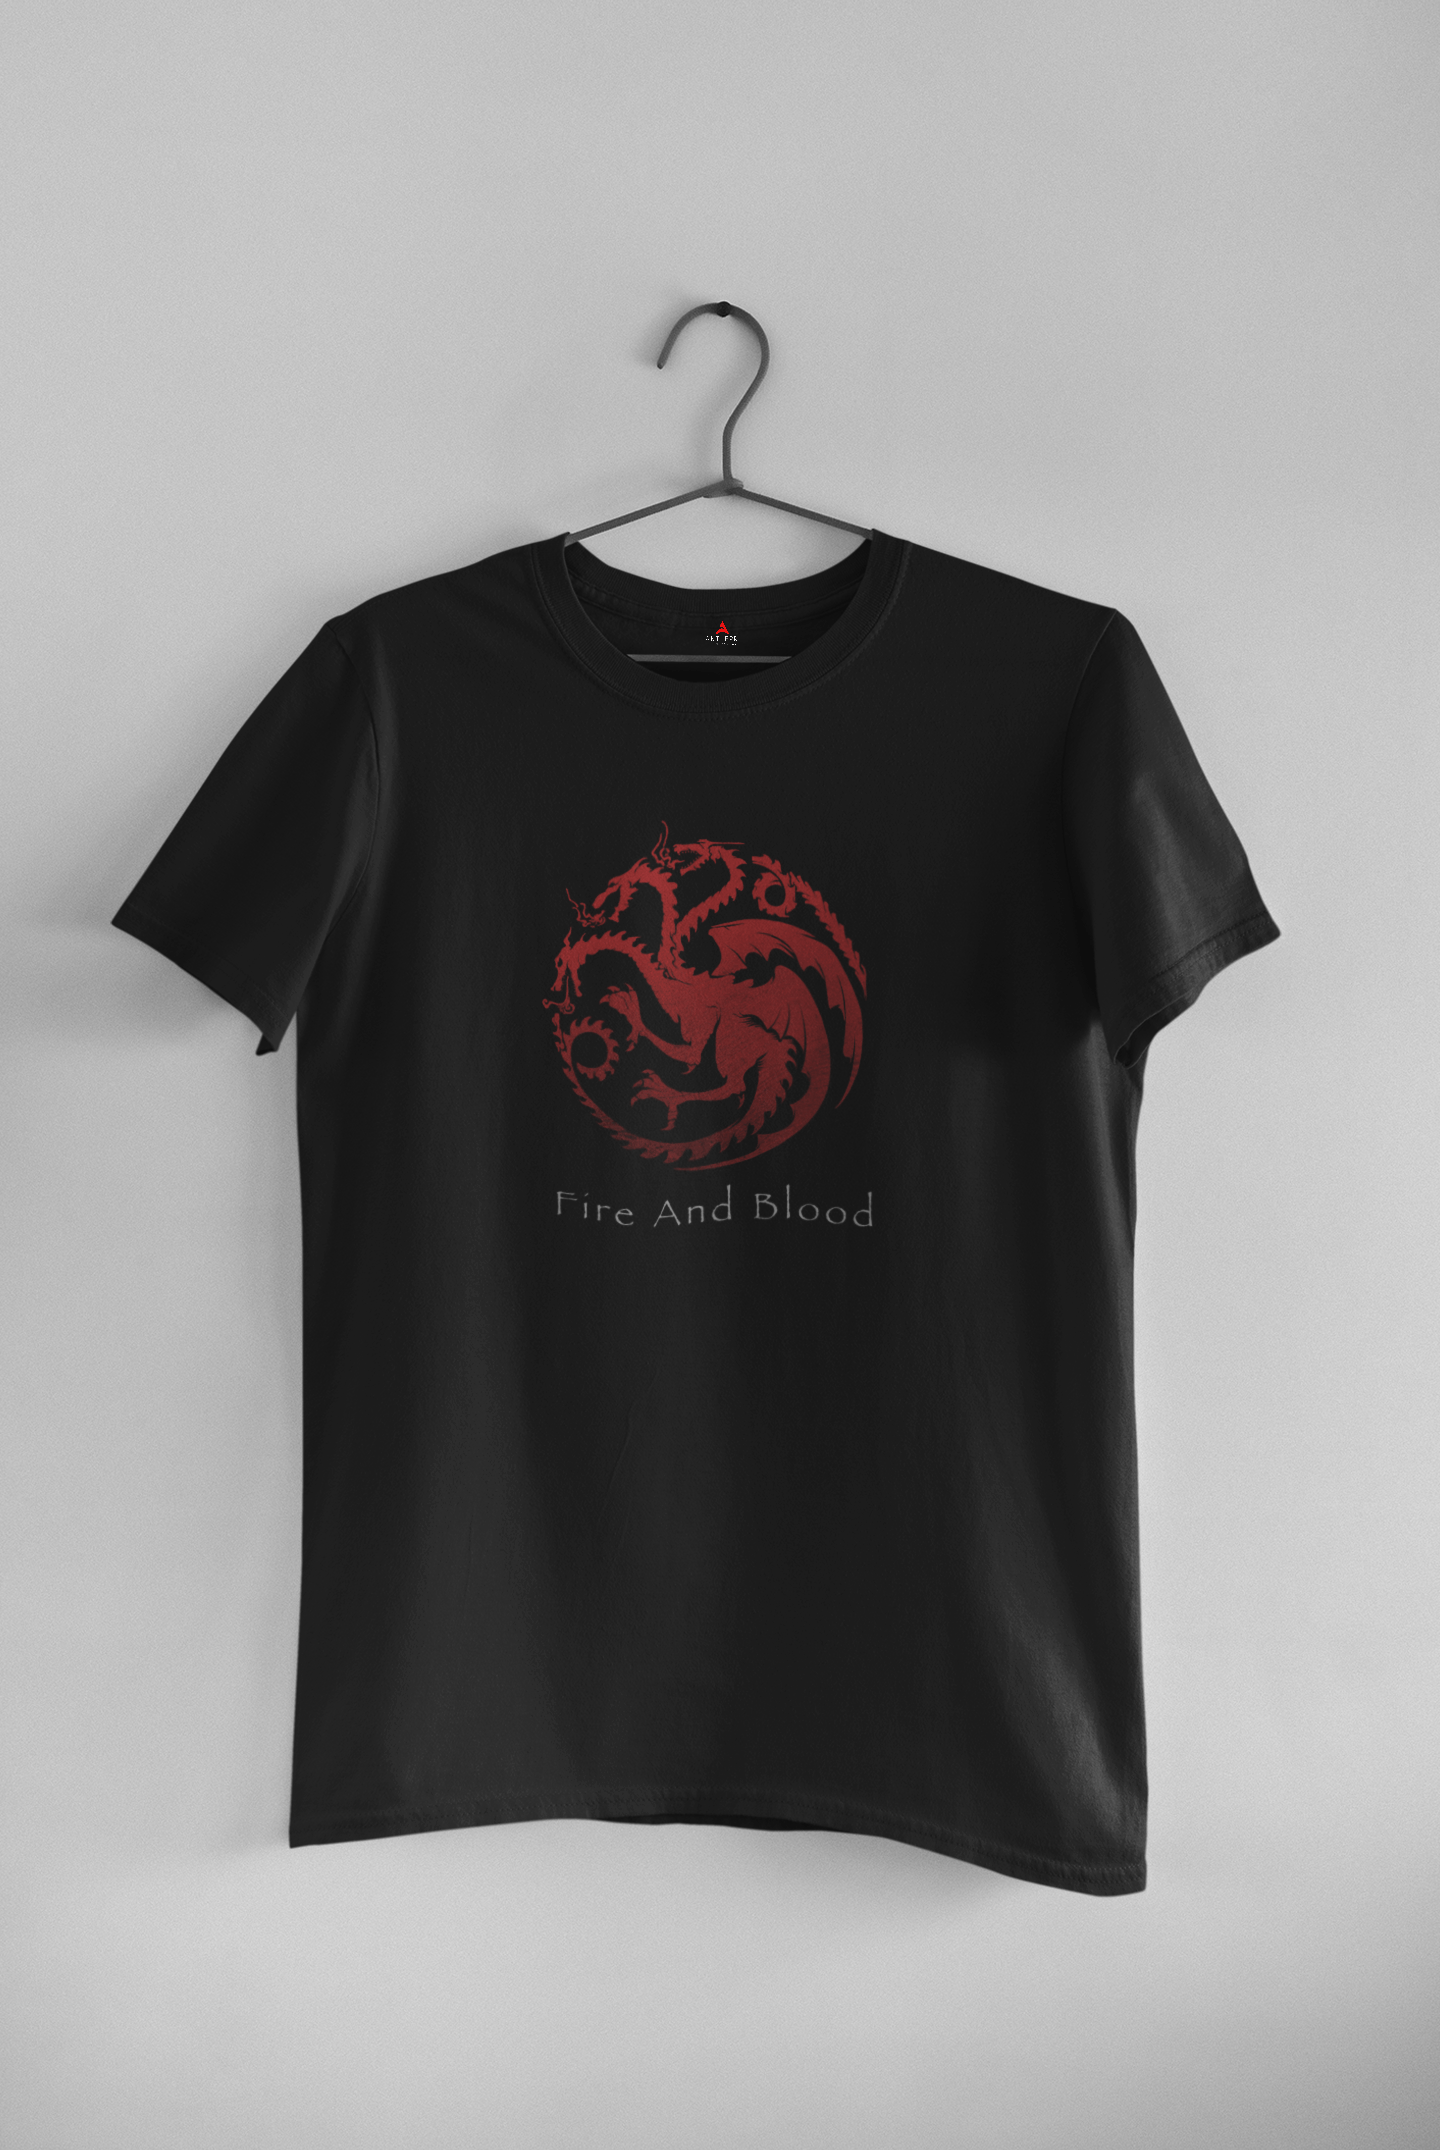 "BLOOD AND FIRE-GAME OF THRONES" - HALF SLEEVE T-SHIRTS